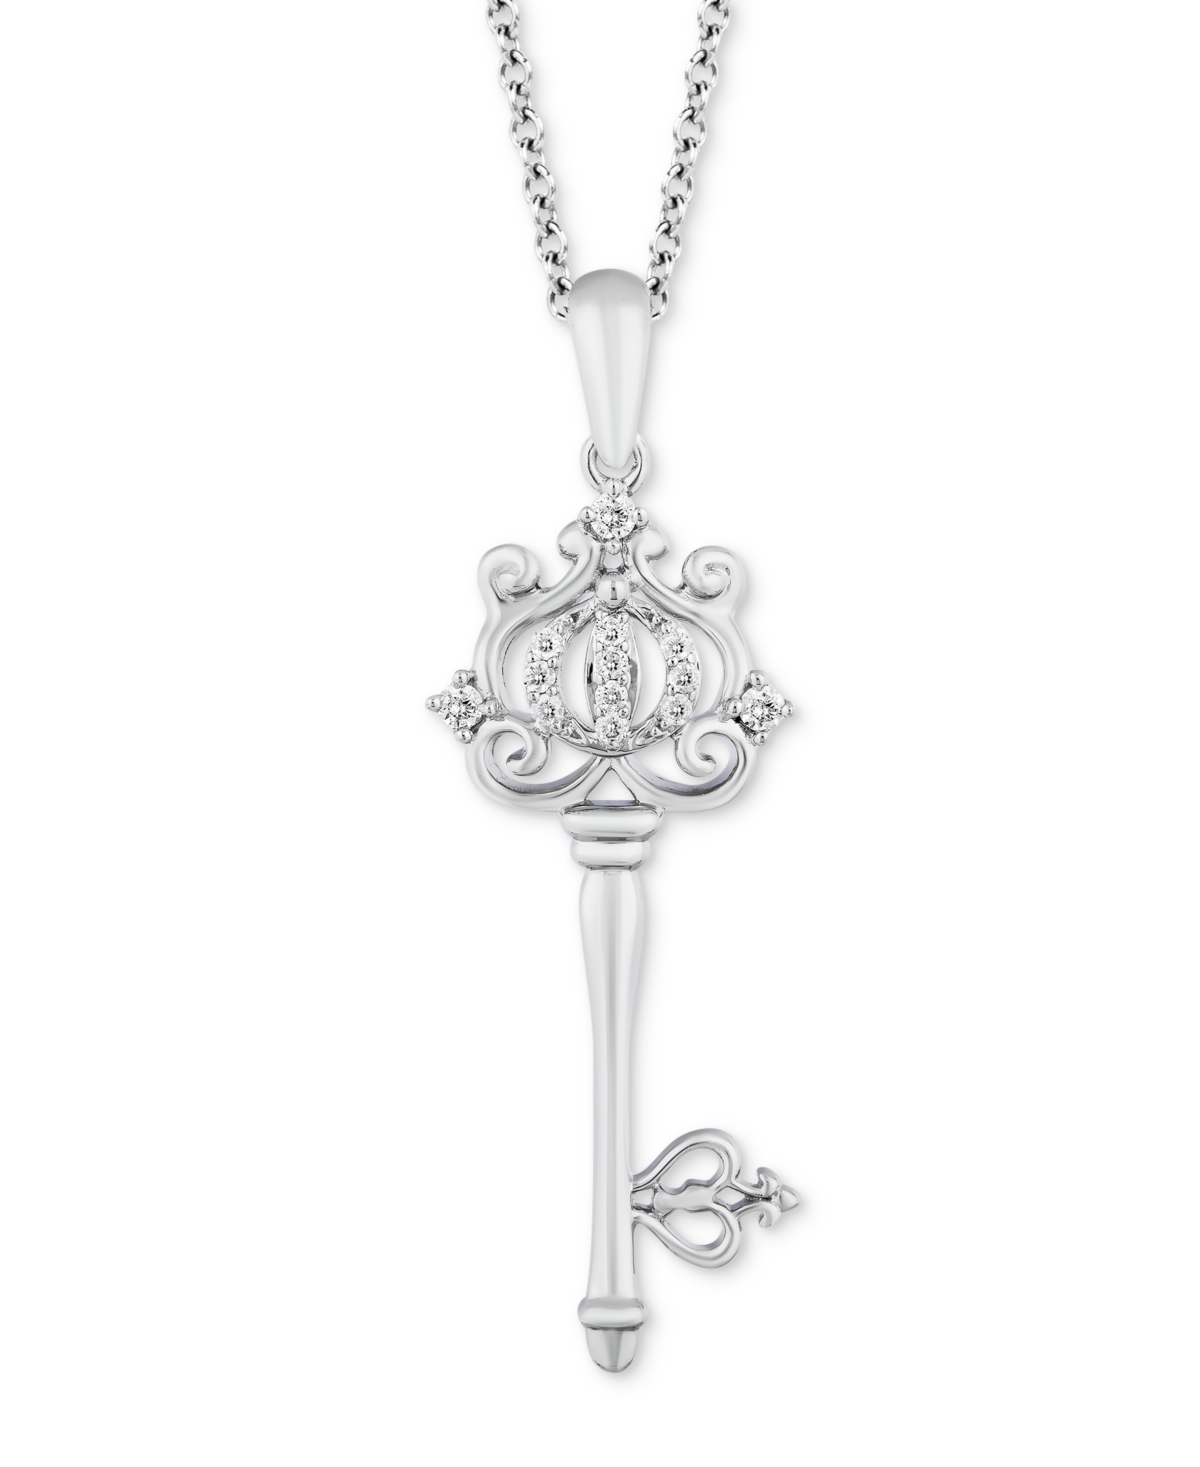 Diamond Cinderella Carriage Key Pendant Necklace (1/10 ct. t.w.) in Sterling Silver, 16" + 2" extender - Sterling Silver